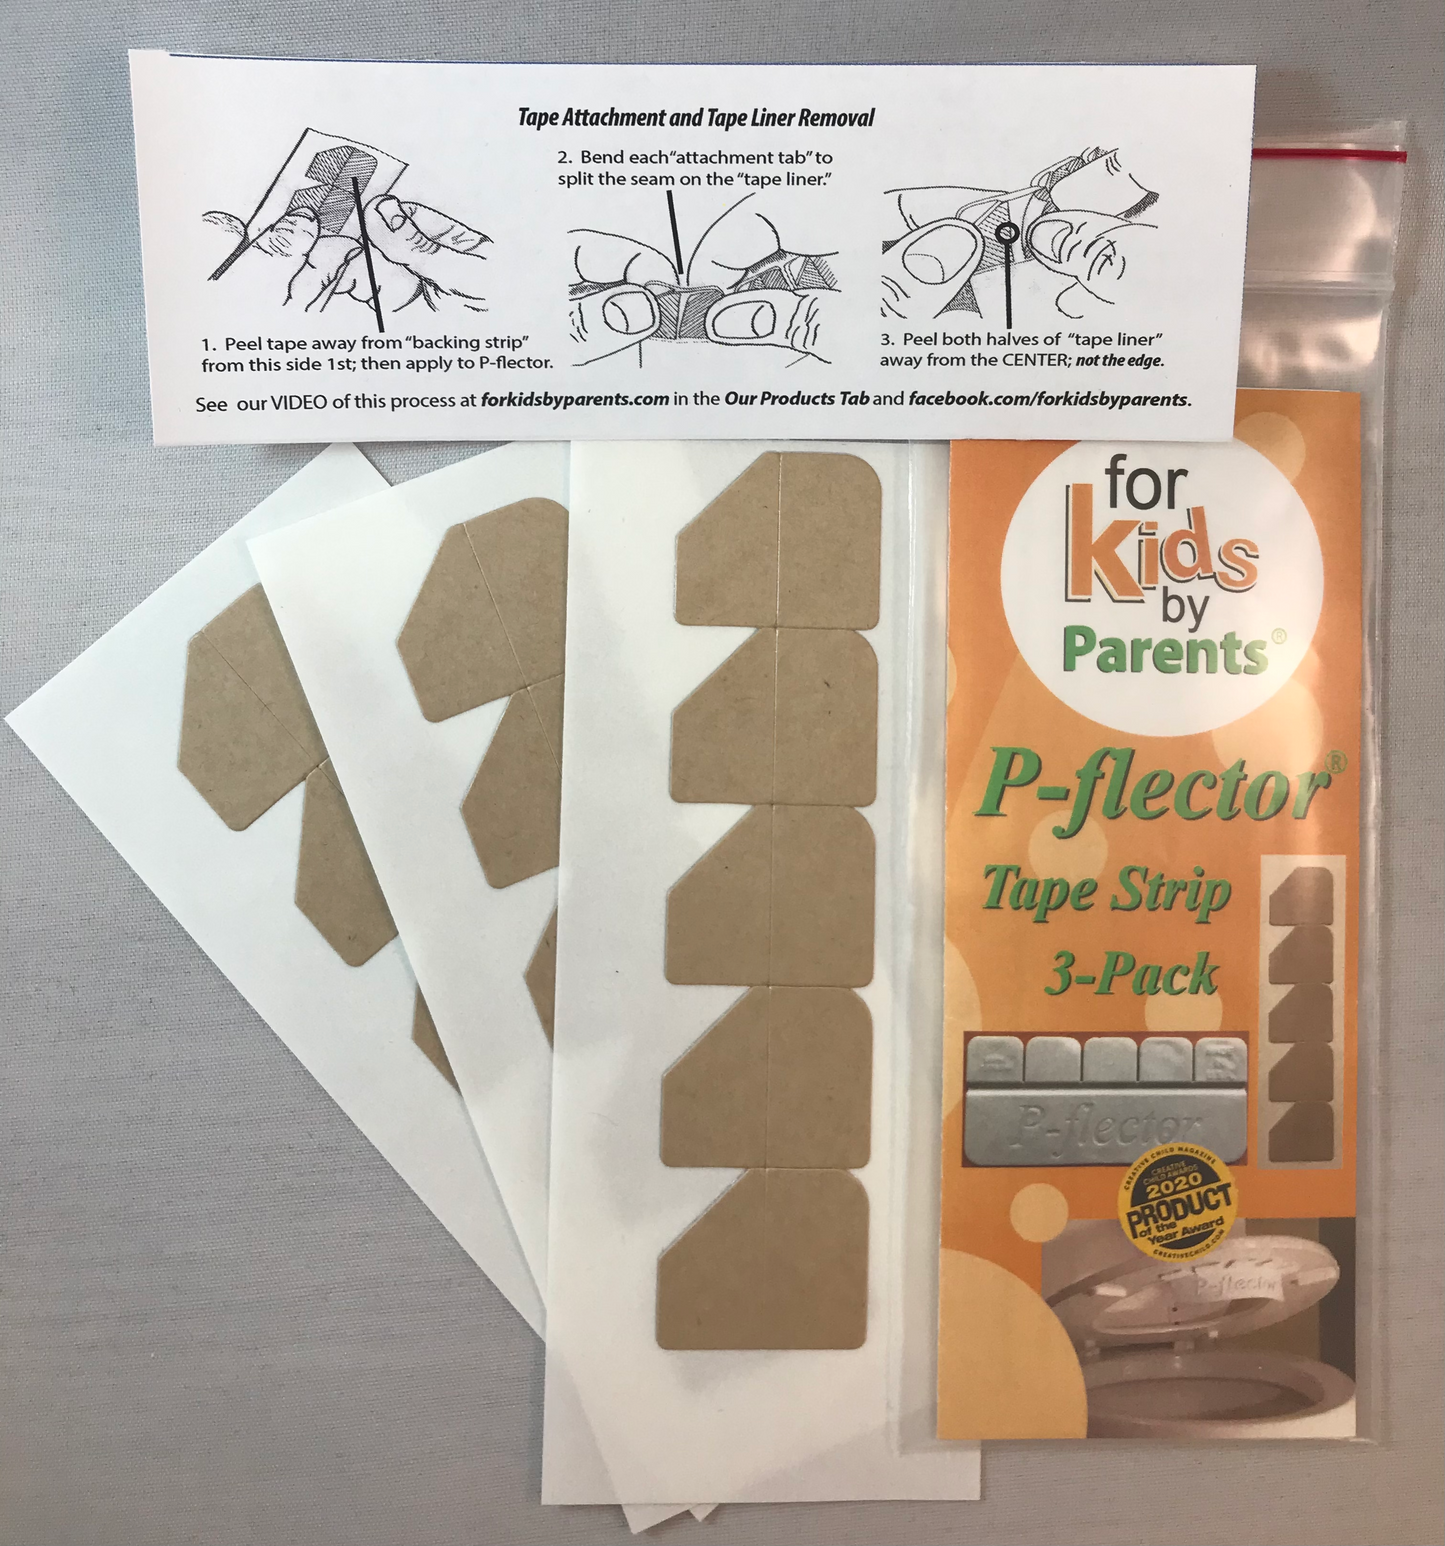 P-flector® Replacement Tape 3-Pack showing package contents of 3 tape strips